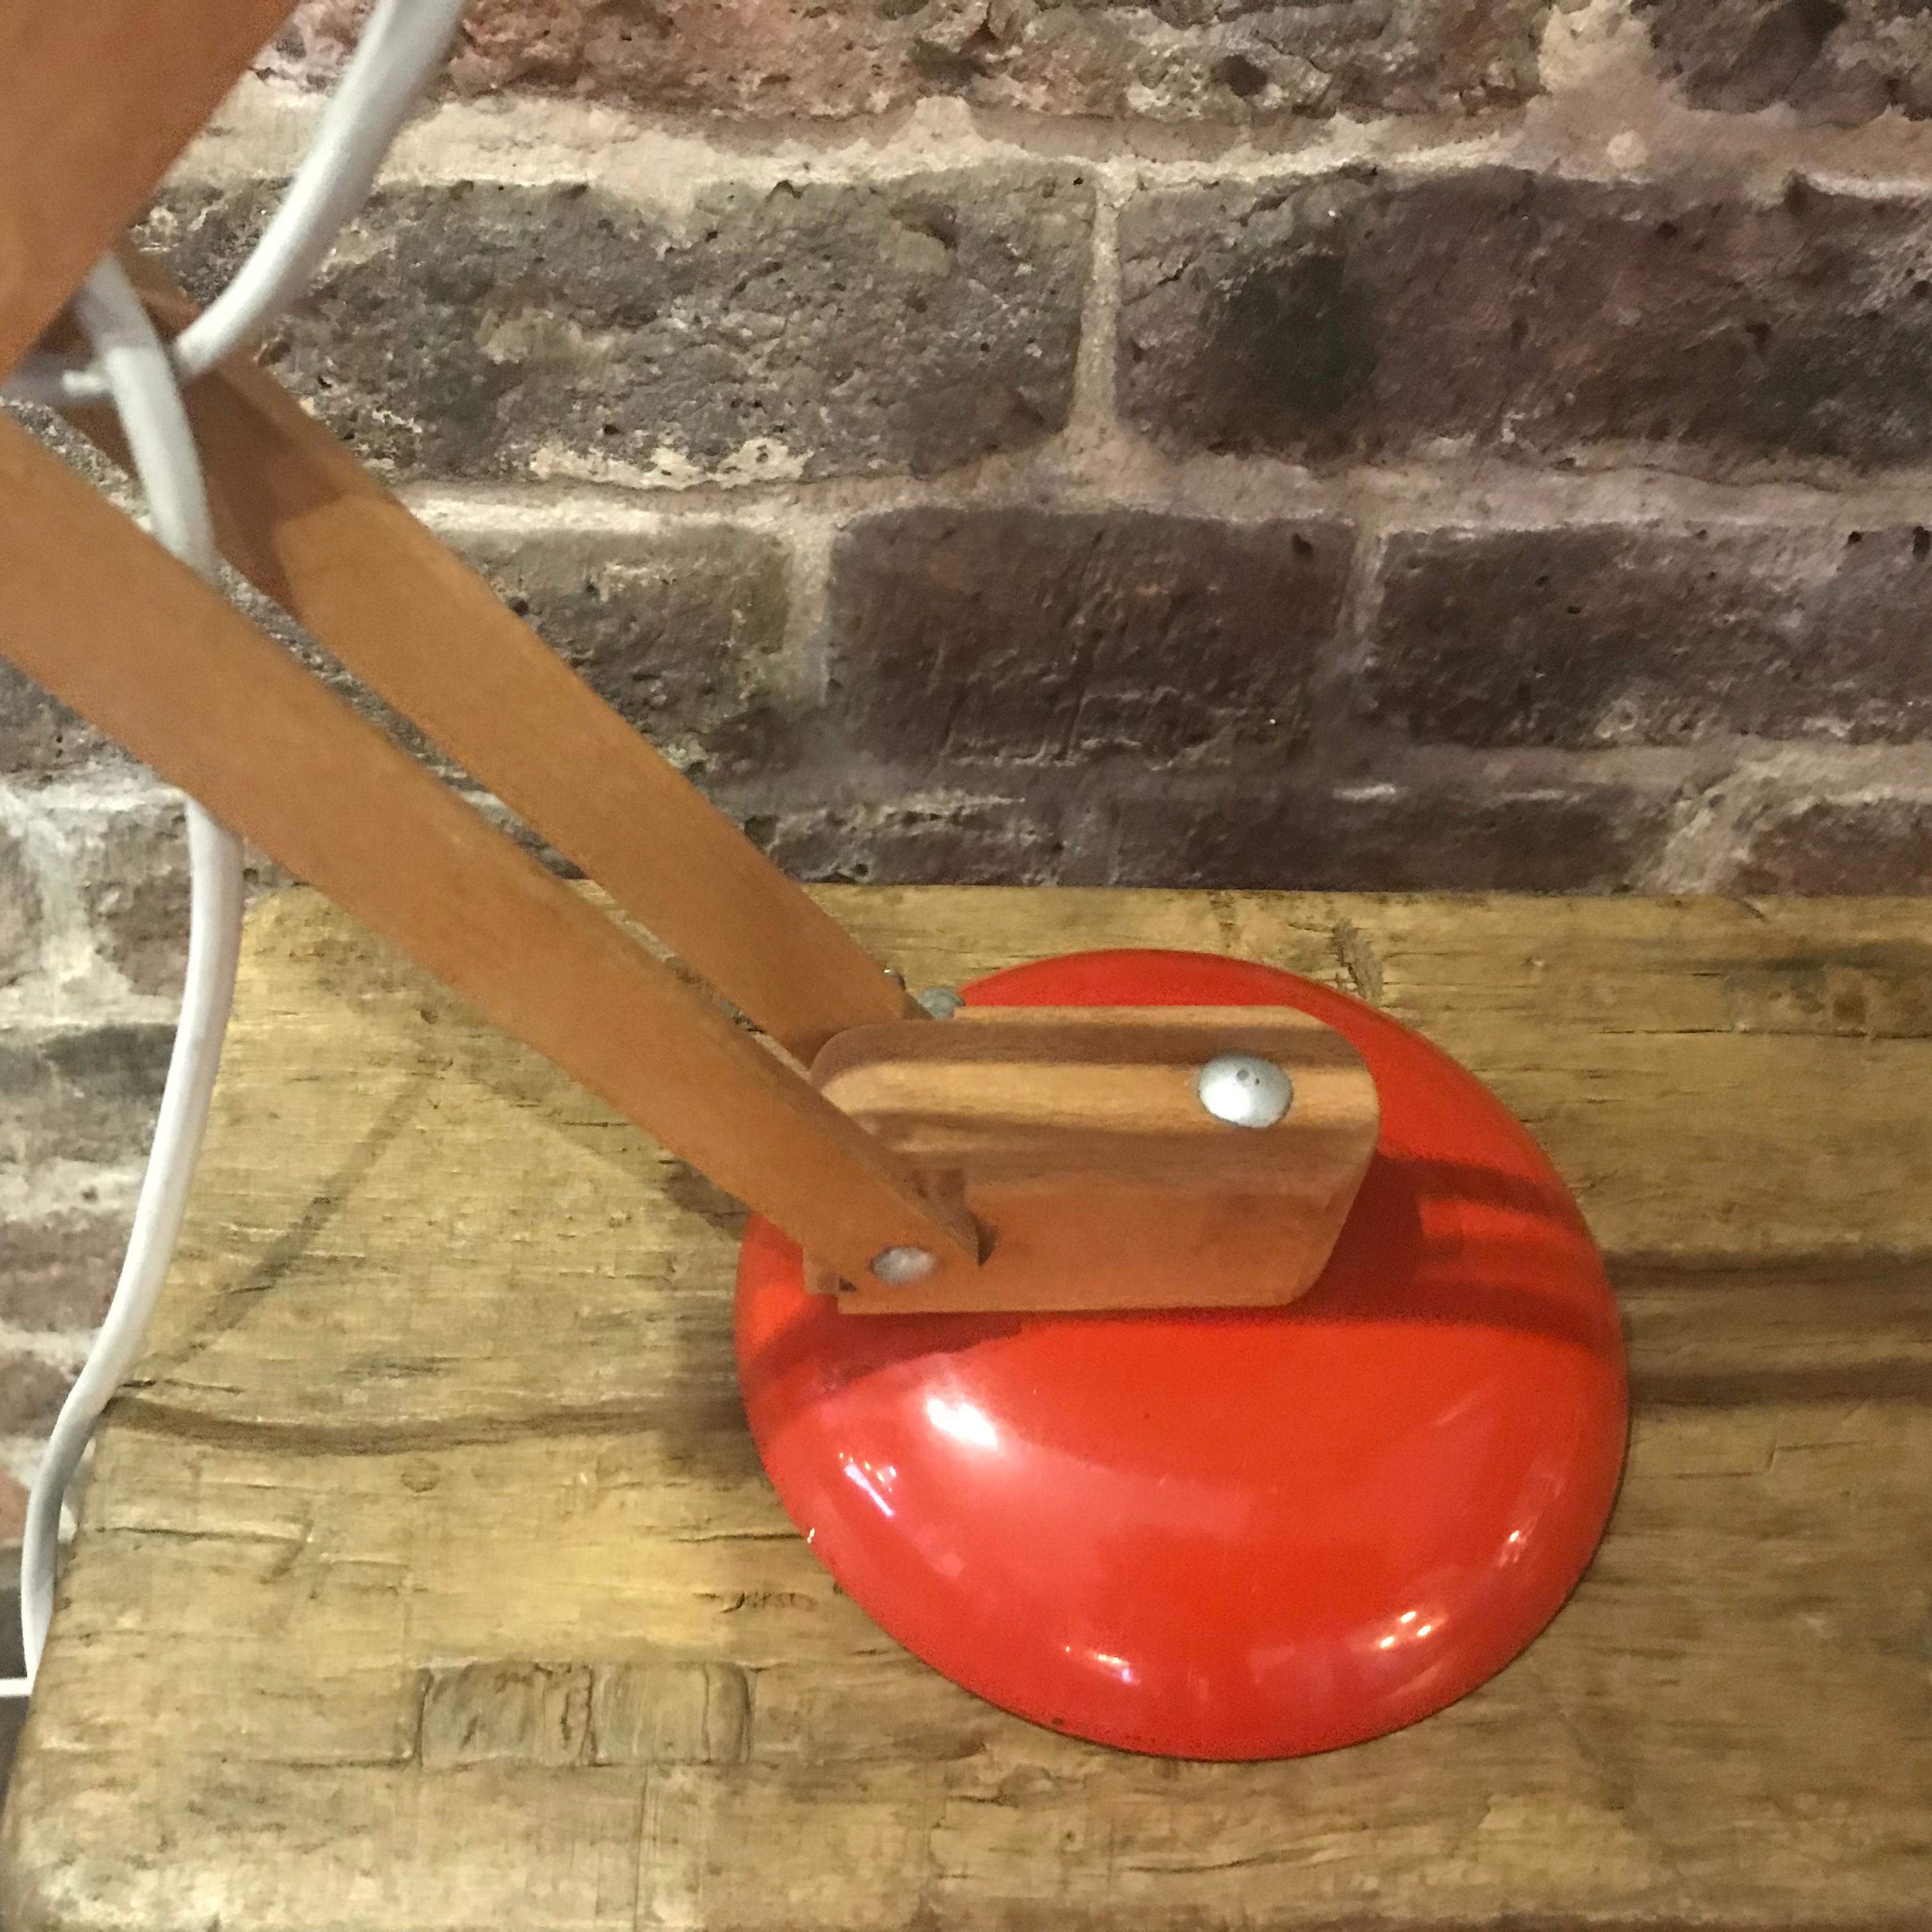 Vintage Maclamp desk or table lamp in orange with wooden arms. 

Designed by Terence Conran for Habitat in the 1950s, this lamp is an icon of the 1950s-1960s period.

In very good vintage condition. Some minimal signs of age, but nothing which